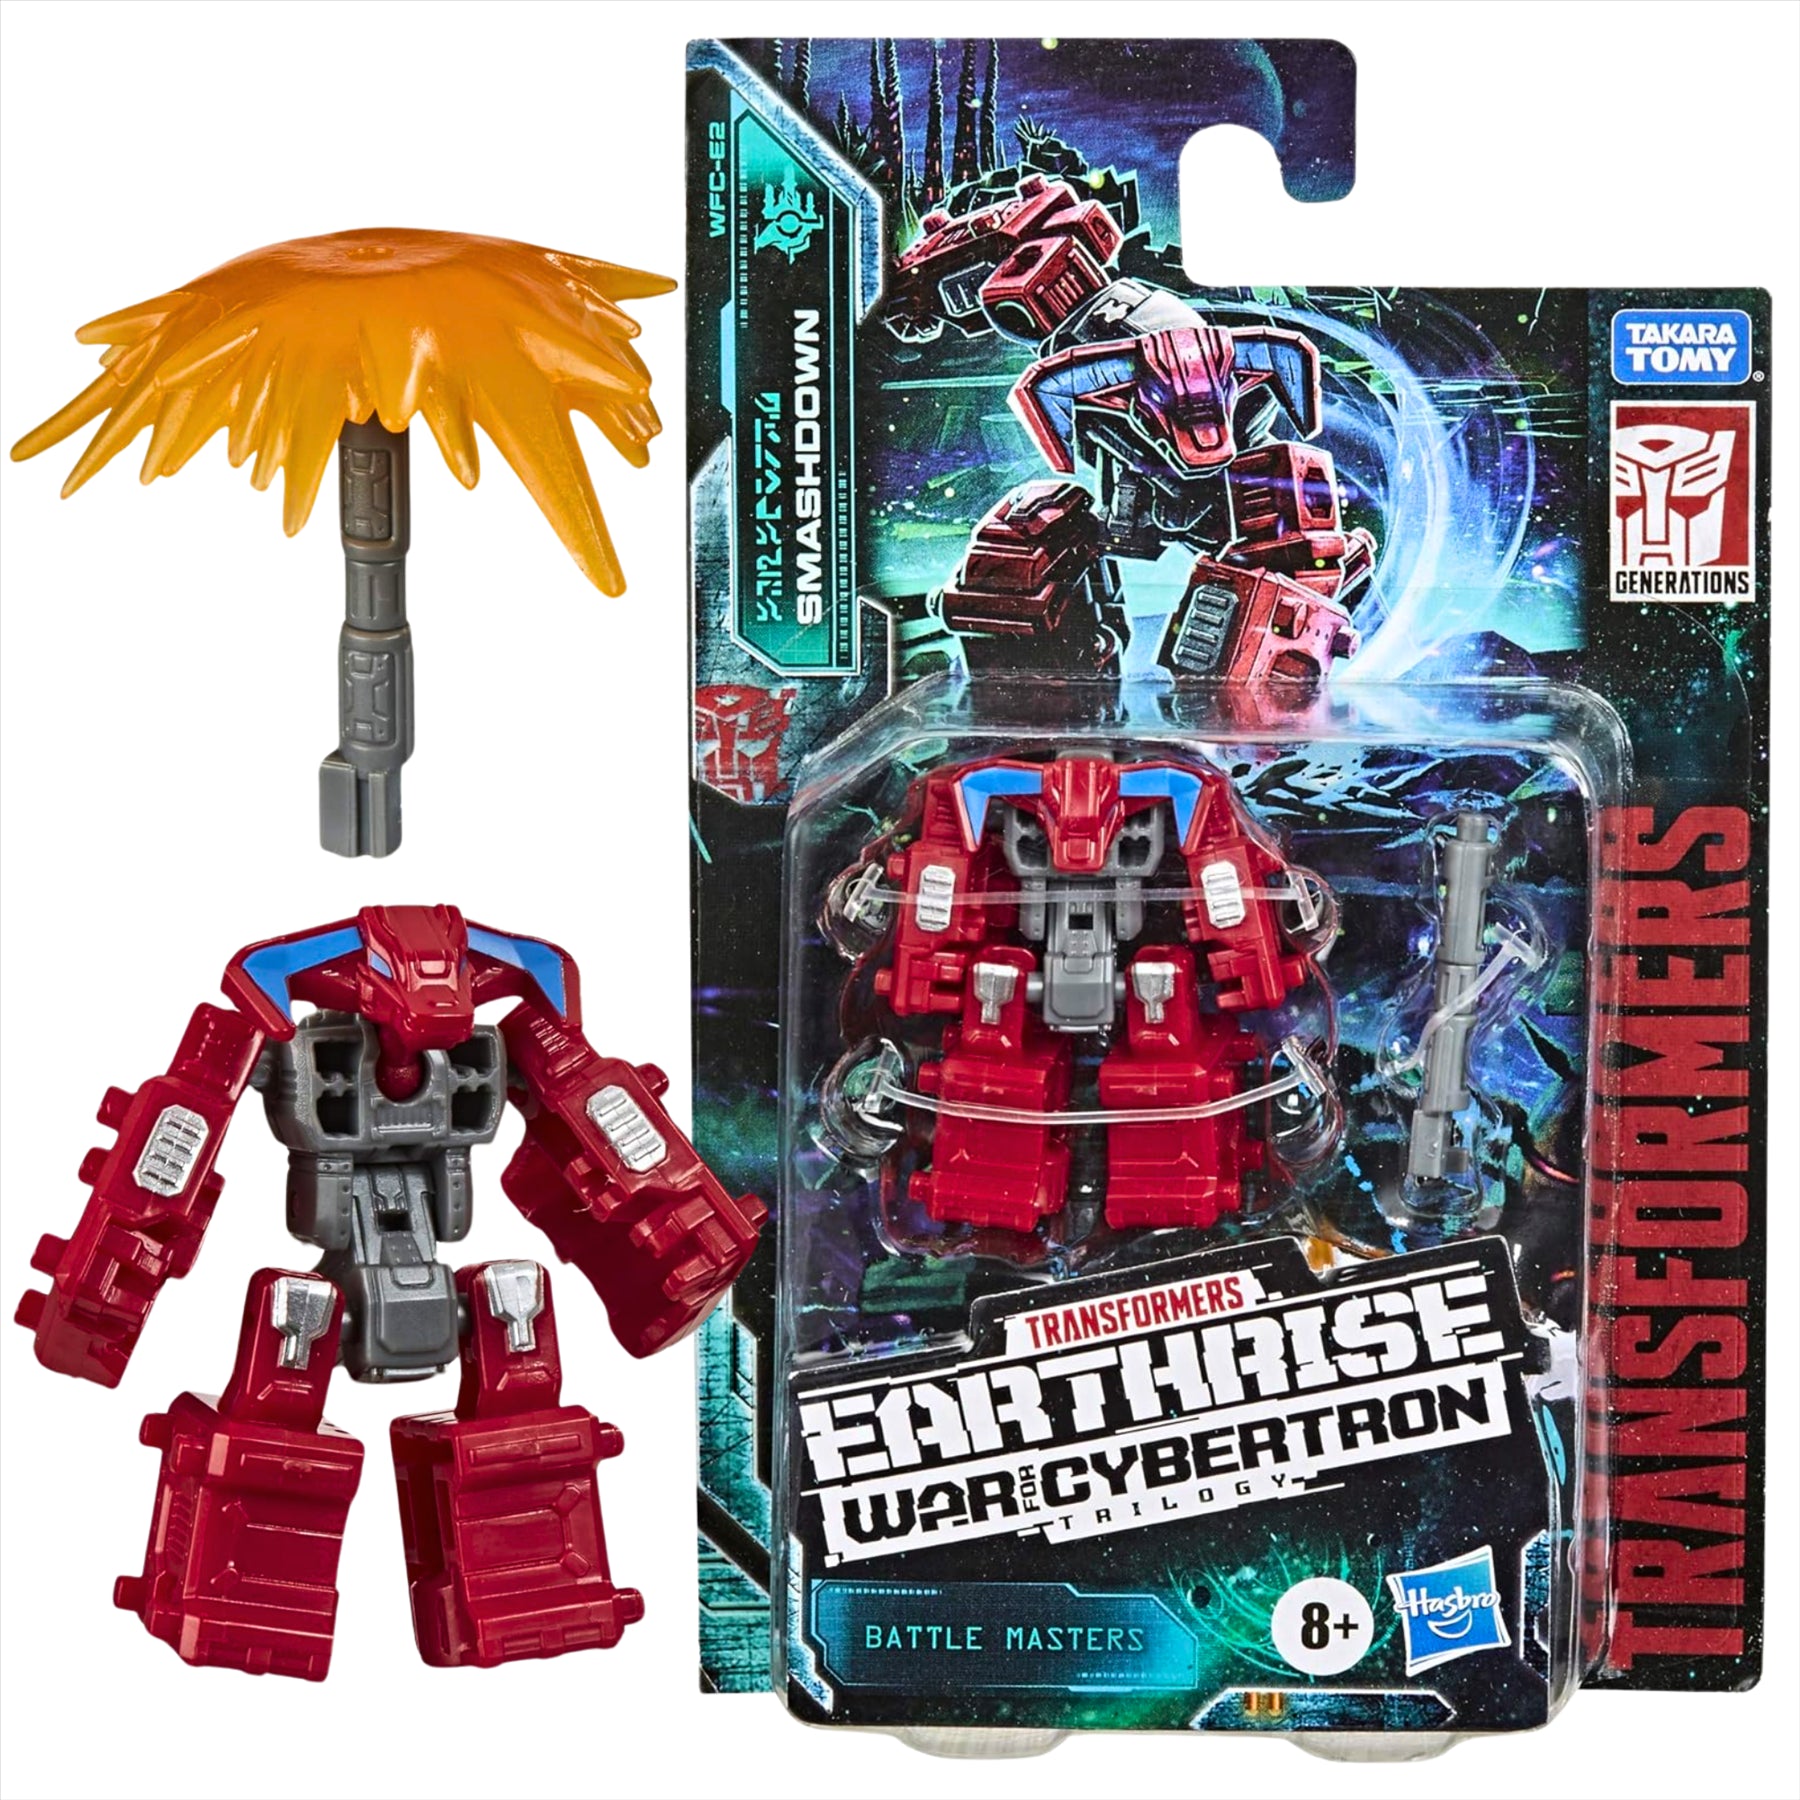 Transformers Earthrise War for Cybertron Smashdown 5cm Articulated Action Figure Toy with Accessory